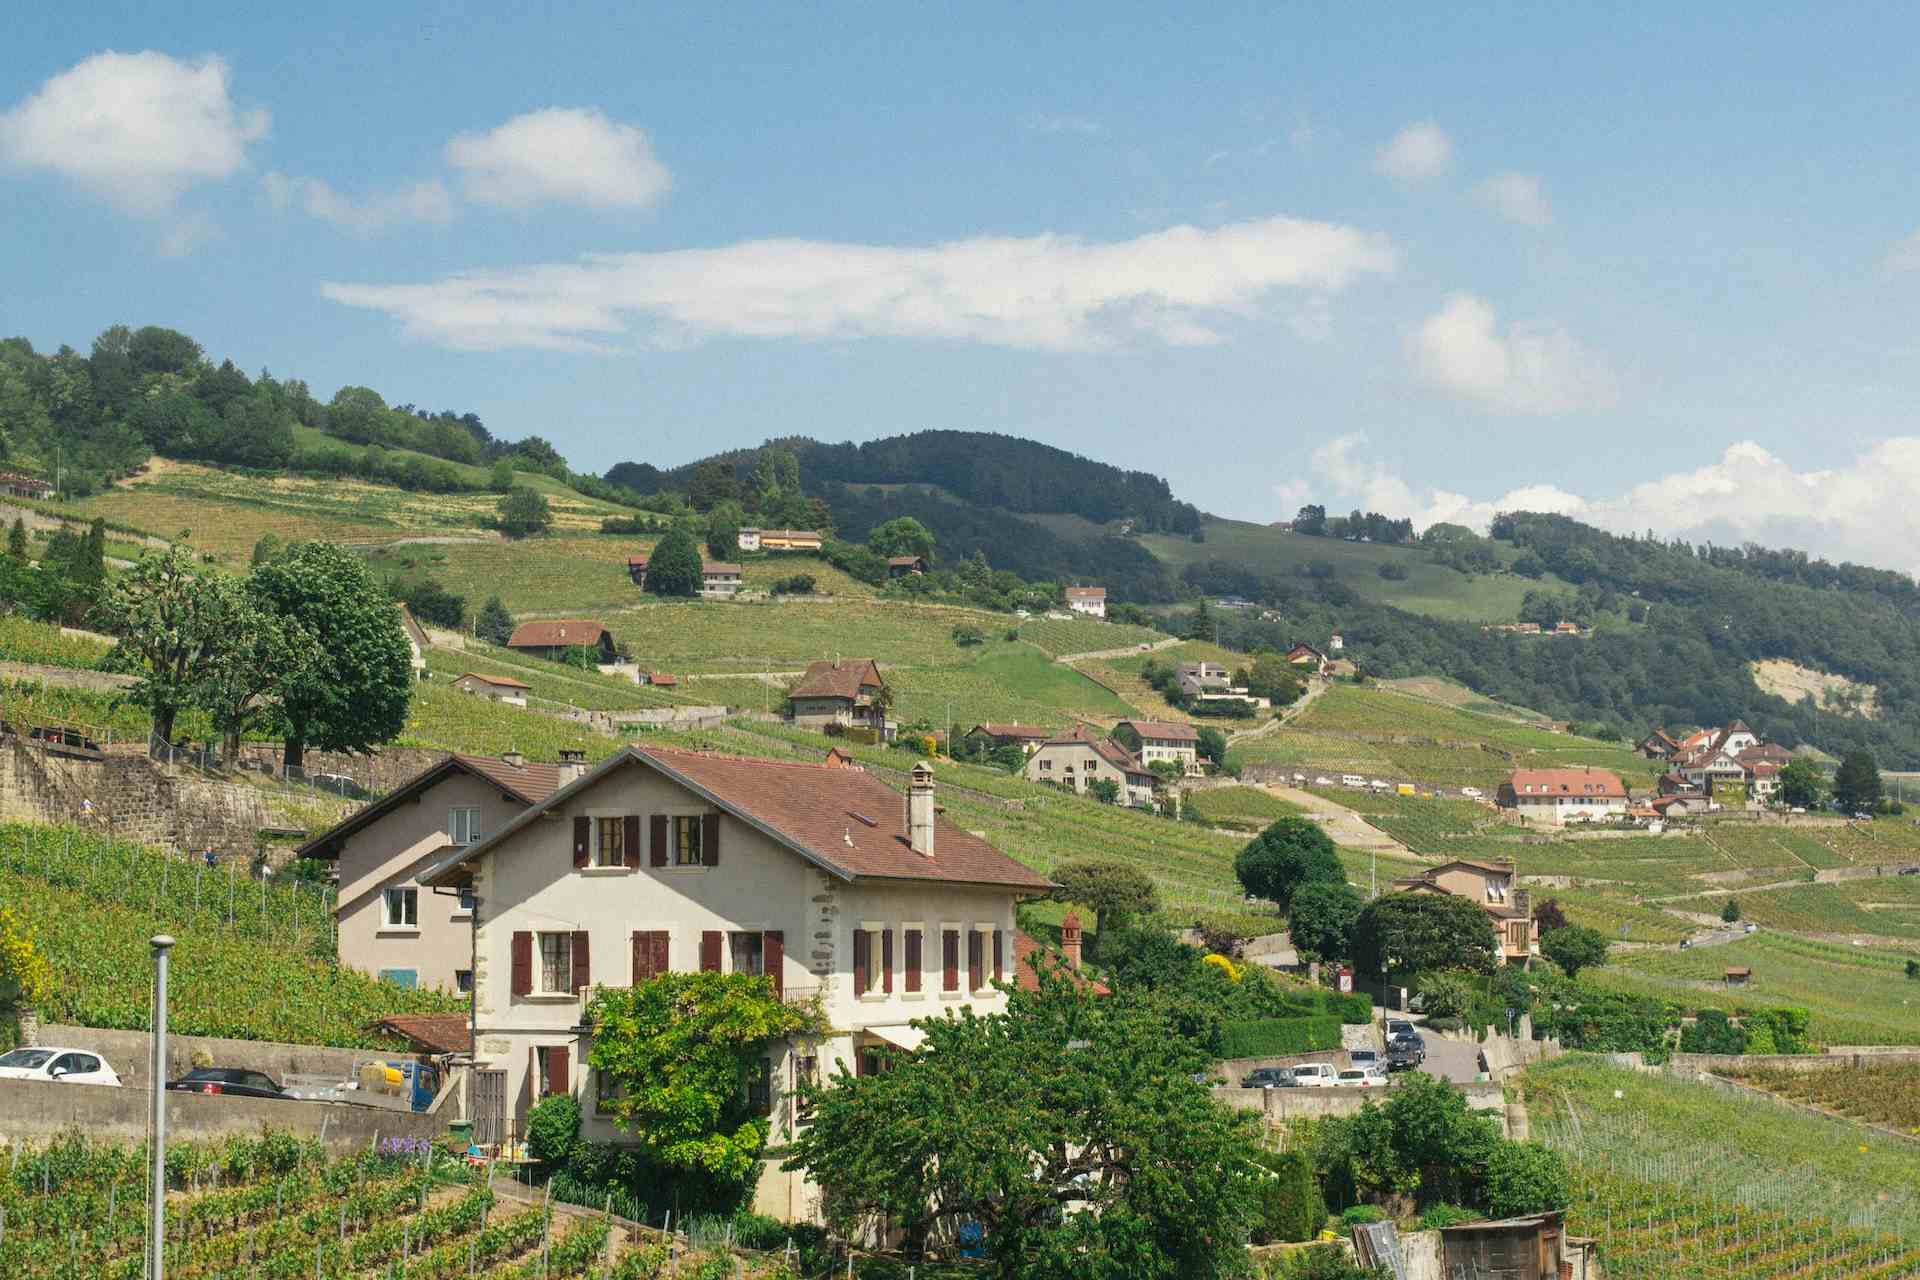 Laiterie-Fromagerie Morard, producer in Ecoteaux canton of Vaud in Switzerland, | Mimelis